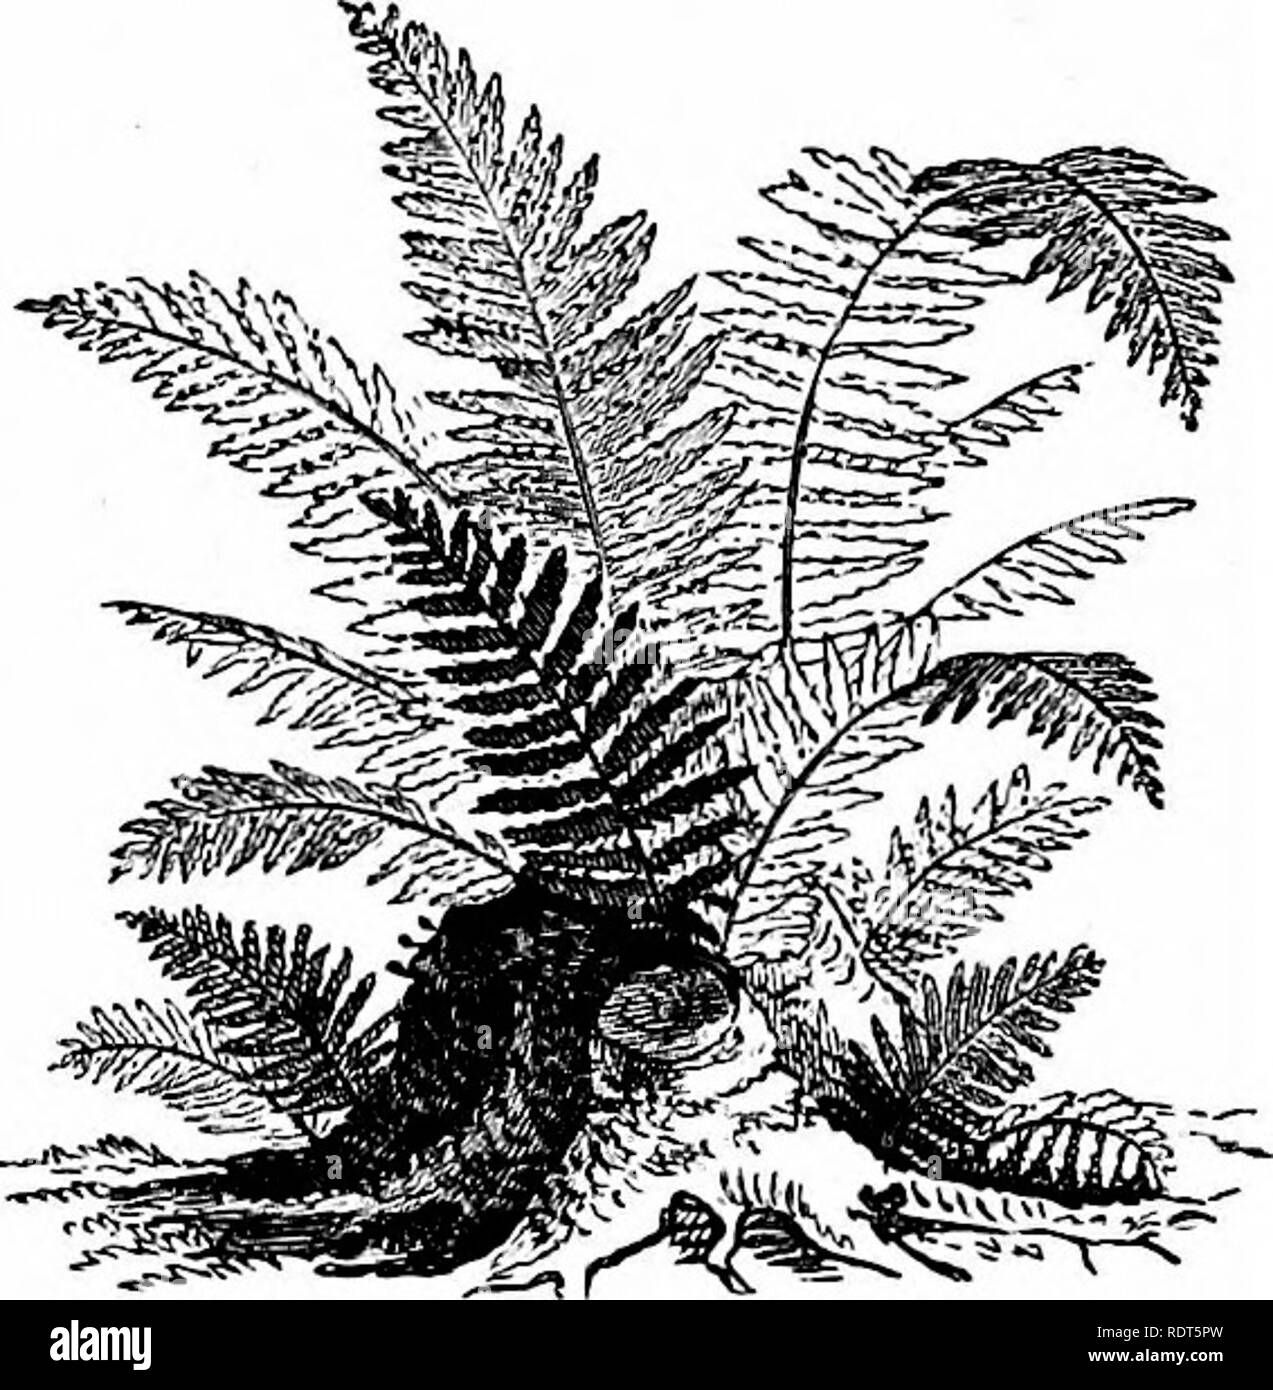 . The new practical window gardener; being practical directions for the cultivation of flowering and foliage plants in windows and glazed cases, and the arrangement of plants and flowers for the embellishment of the household. Window-gardening. 112 Hardy Ferns. Cristatum is a curious and beautiful variety, the points of the fronds and divisions being tasselled and crested much like the crested male fern. Polystichum aculeatum, or common prickly shield fern, is very like the preceding, only it has a more rigid habit; the pinnae or leaflets are smaller, of a dark shining green and of harsh rigid Stock Photo